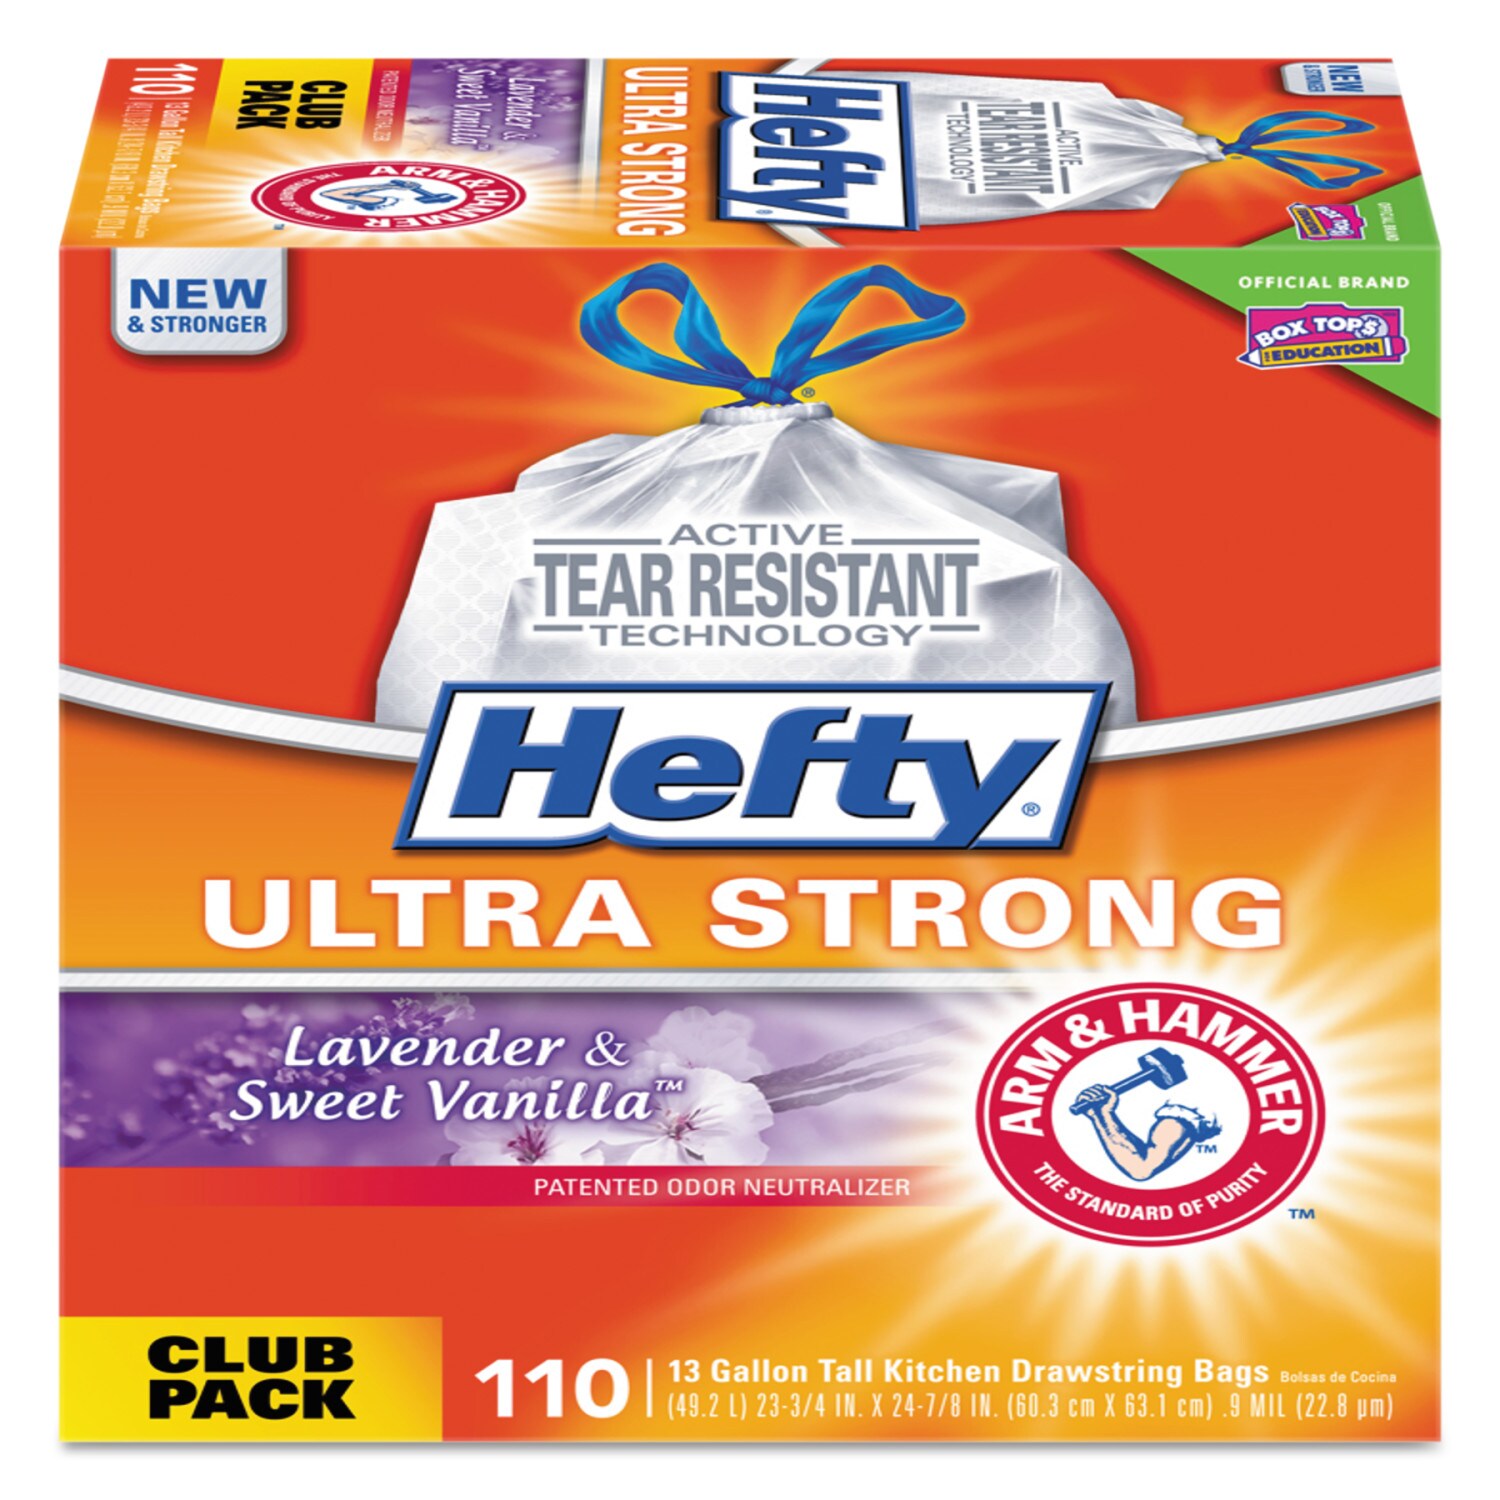 Hefty Ultra Strong Tall Kitchen Trash Bags Fabuloso Scent 13 Gallon 110  Count White 110 Count (Pack of 1)